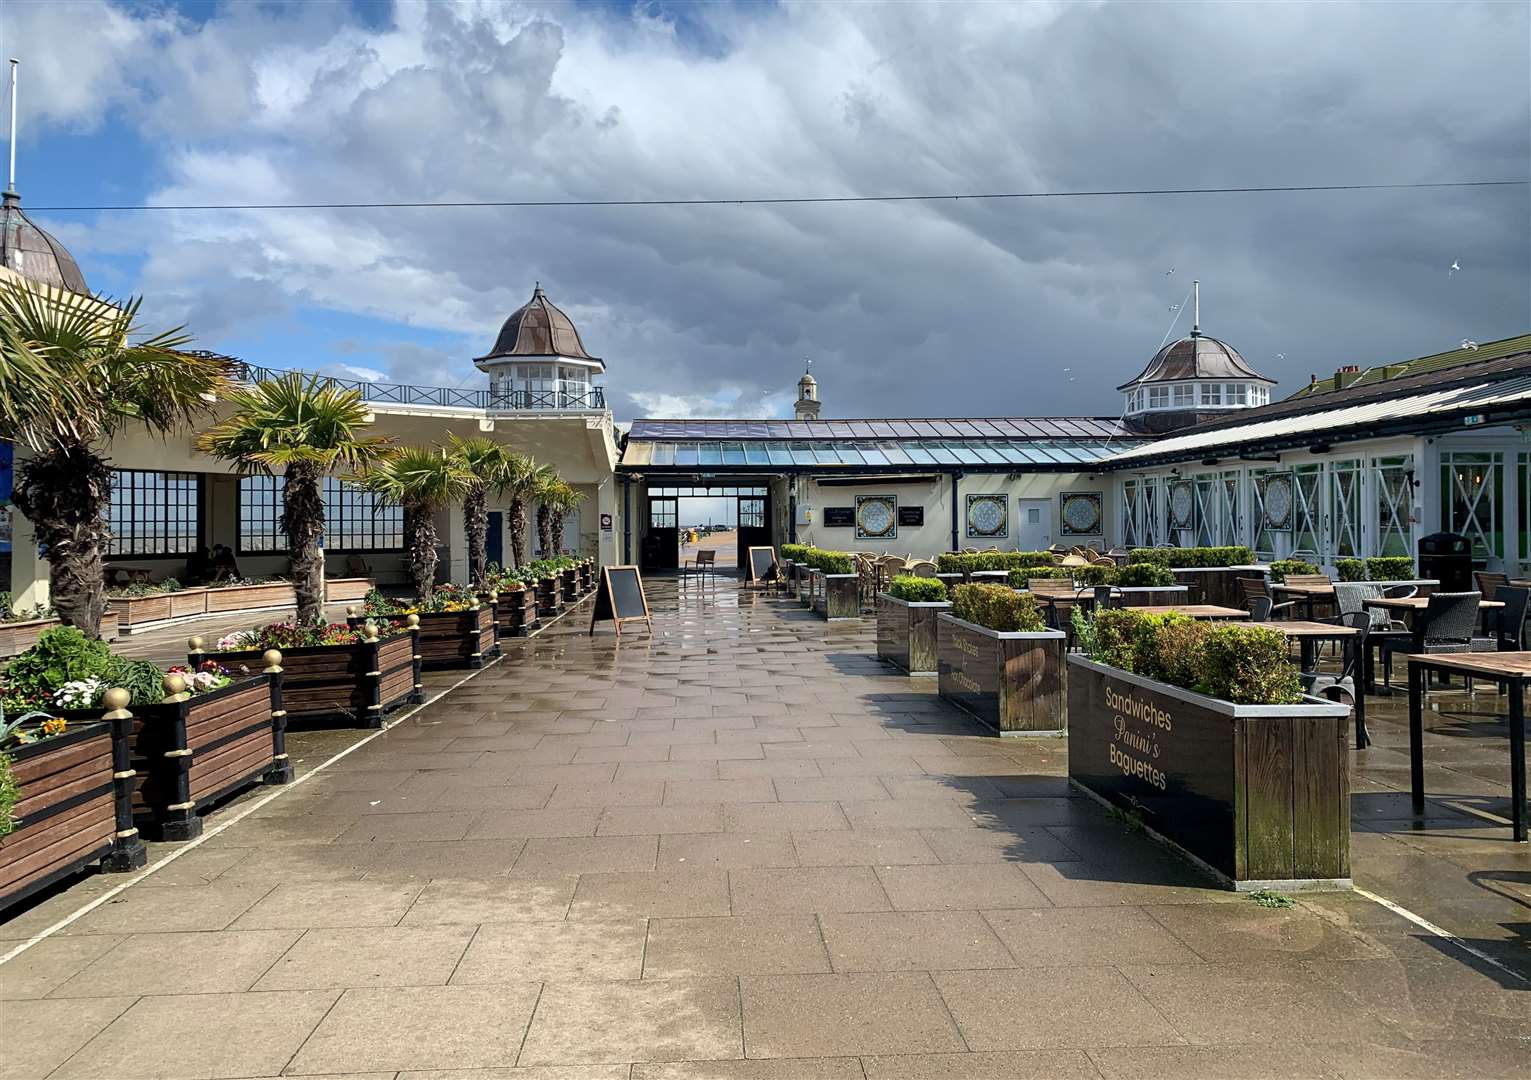 There is "extensive" structural damage at Herne Bay Bandstand